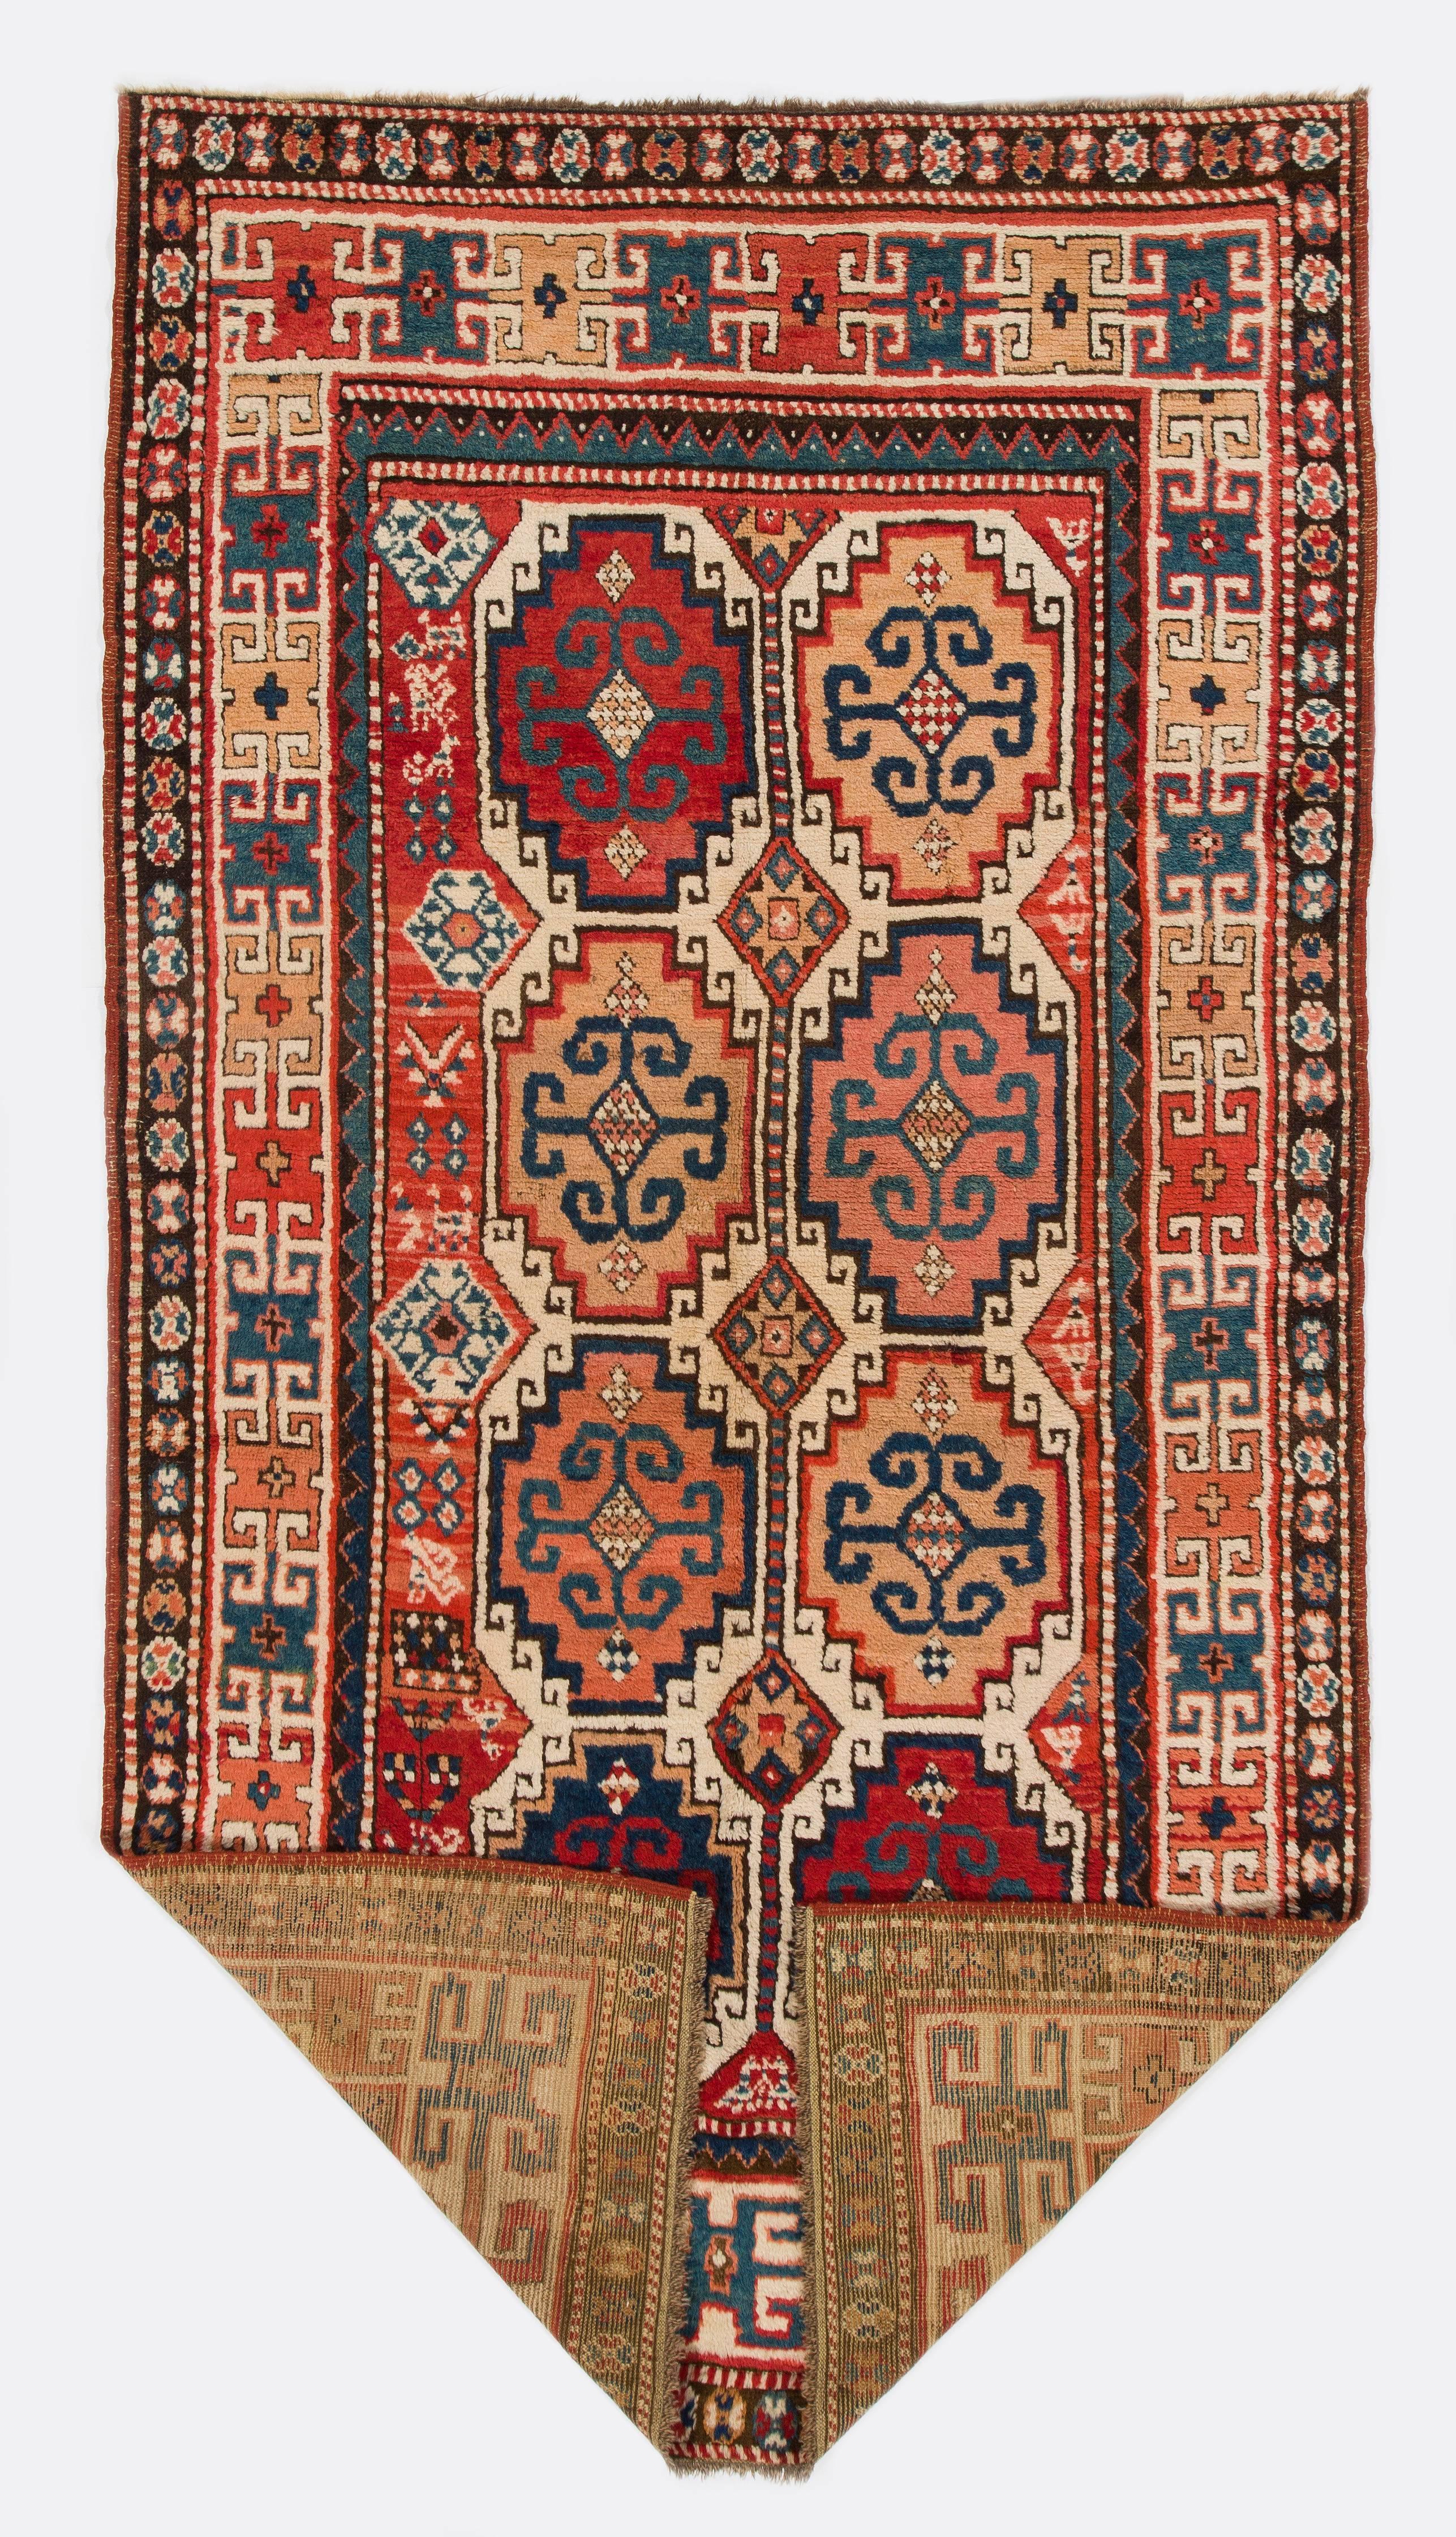 Antique Caucasian Moghan Kazak rug, circa 1870. Finely hand-knotted with even medium wool pile on wool foundation. Very good condition. Sturdy and as clean as a brand new rug (deep washed professionally). 
Size: 4.1 x 7.6 ft.